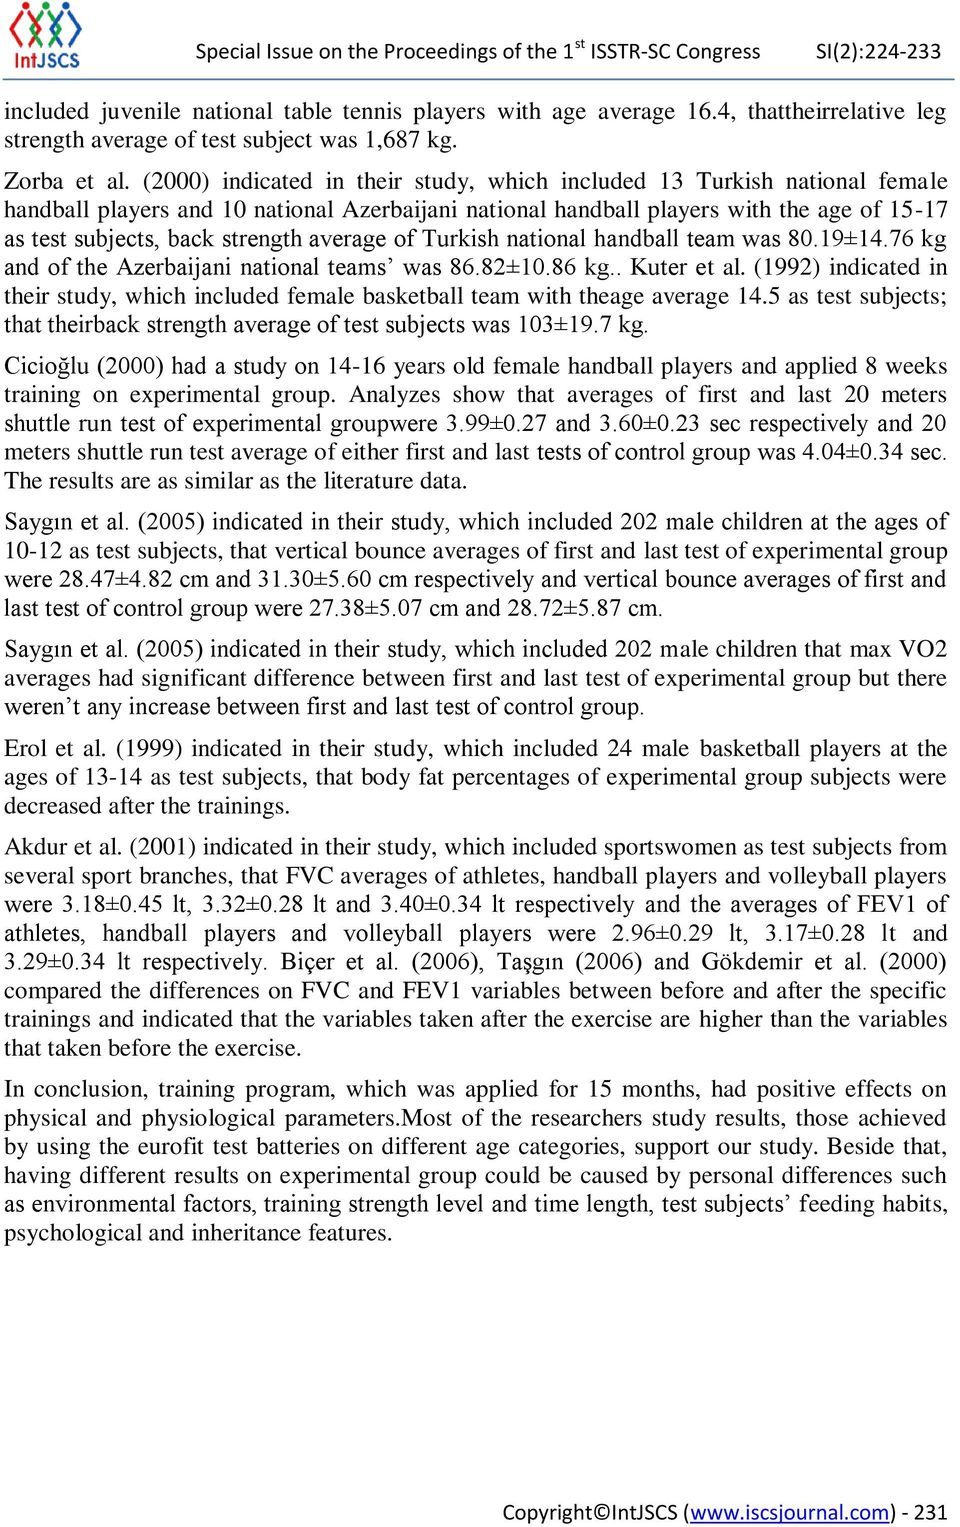 (2000) indicated in their study, which included 13 Turkish national female handball players and 10 national Azerbaijani national handball players with the age of 15-17 as test subjects, back strength